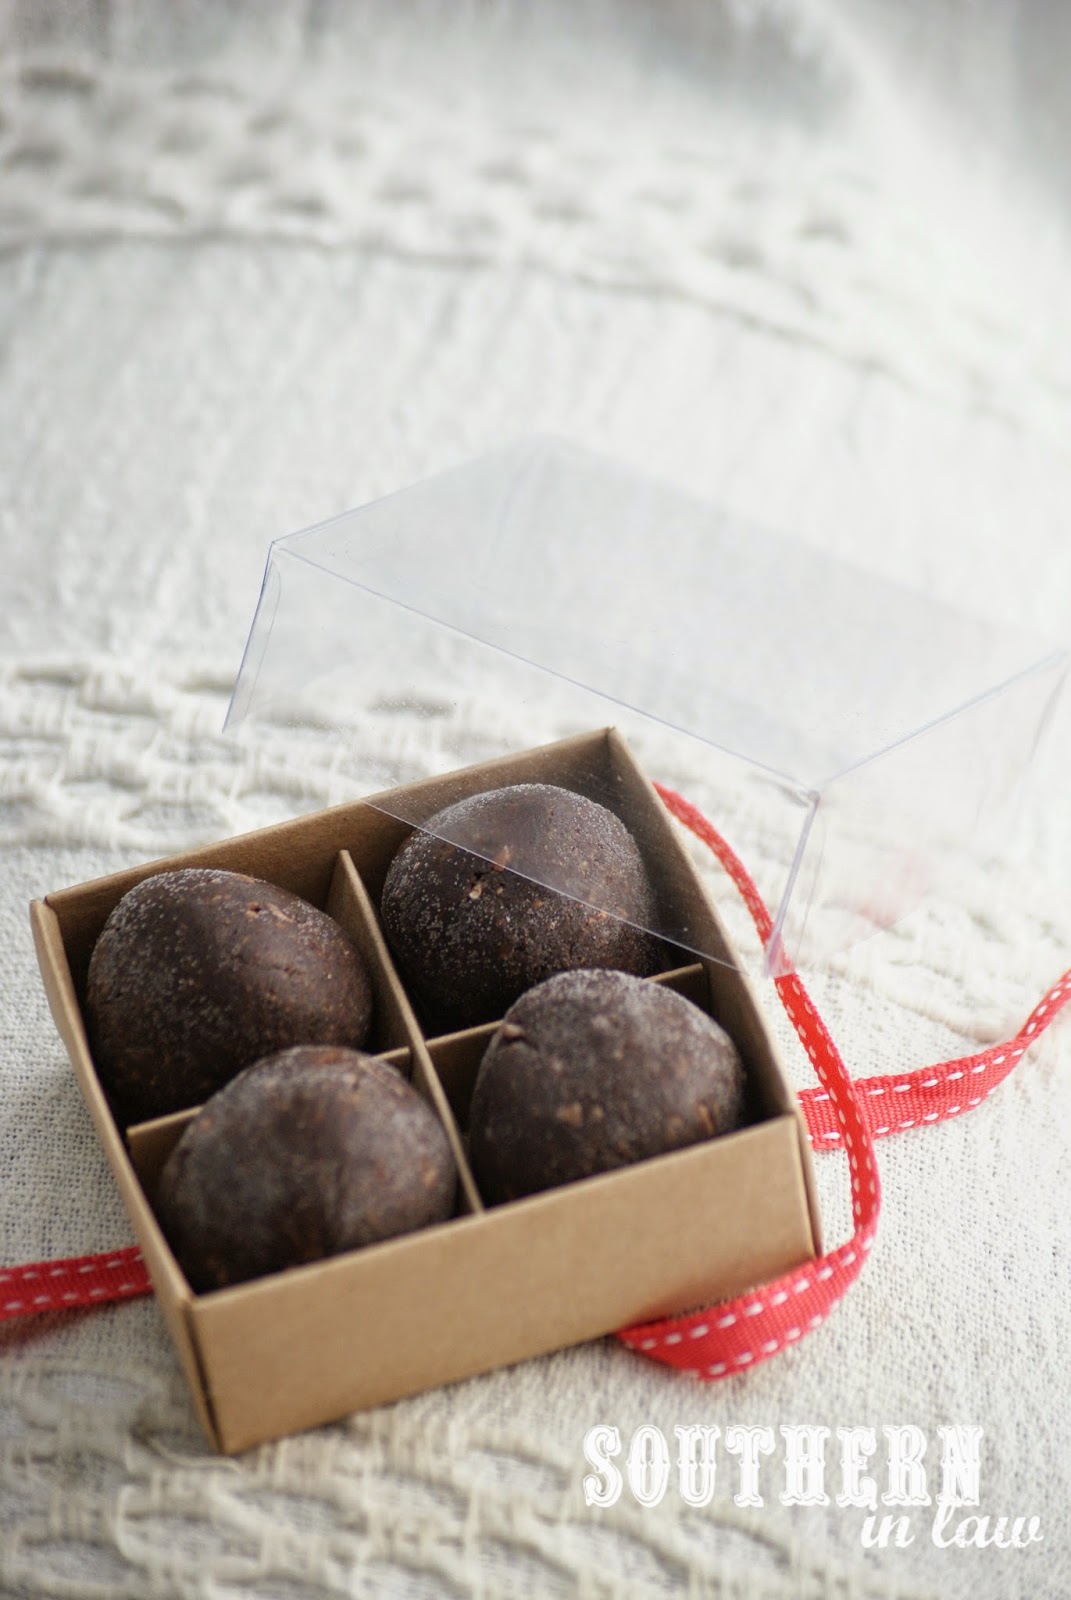 How to Package Homemade Chocolates for Gifting - Easy Homemade Chocolate Gift Ideas How-To - Homemade Chocolate Truffles Recipe